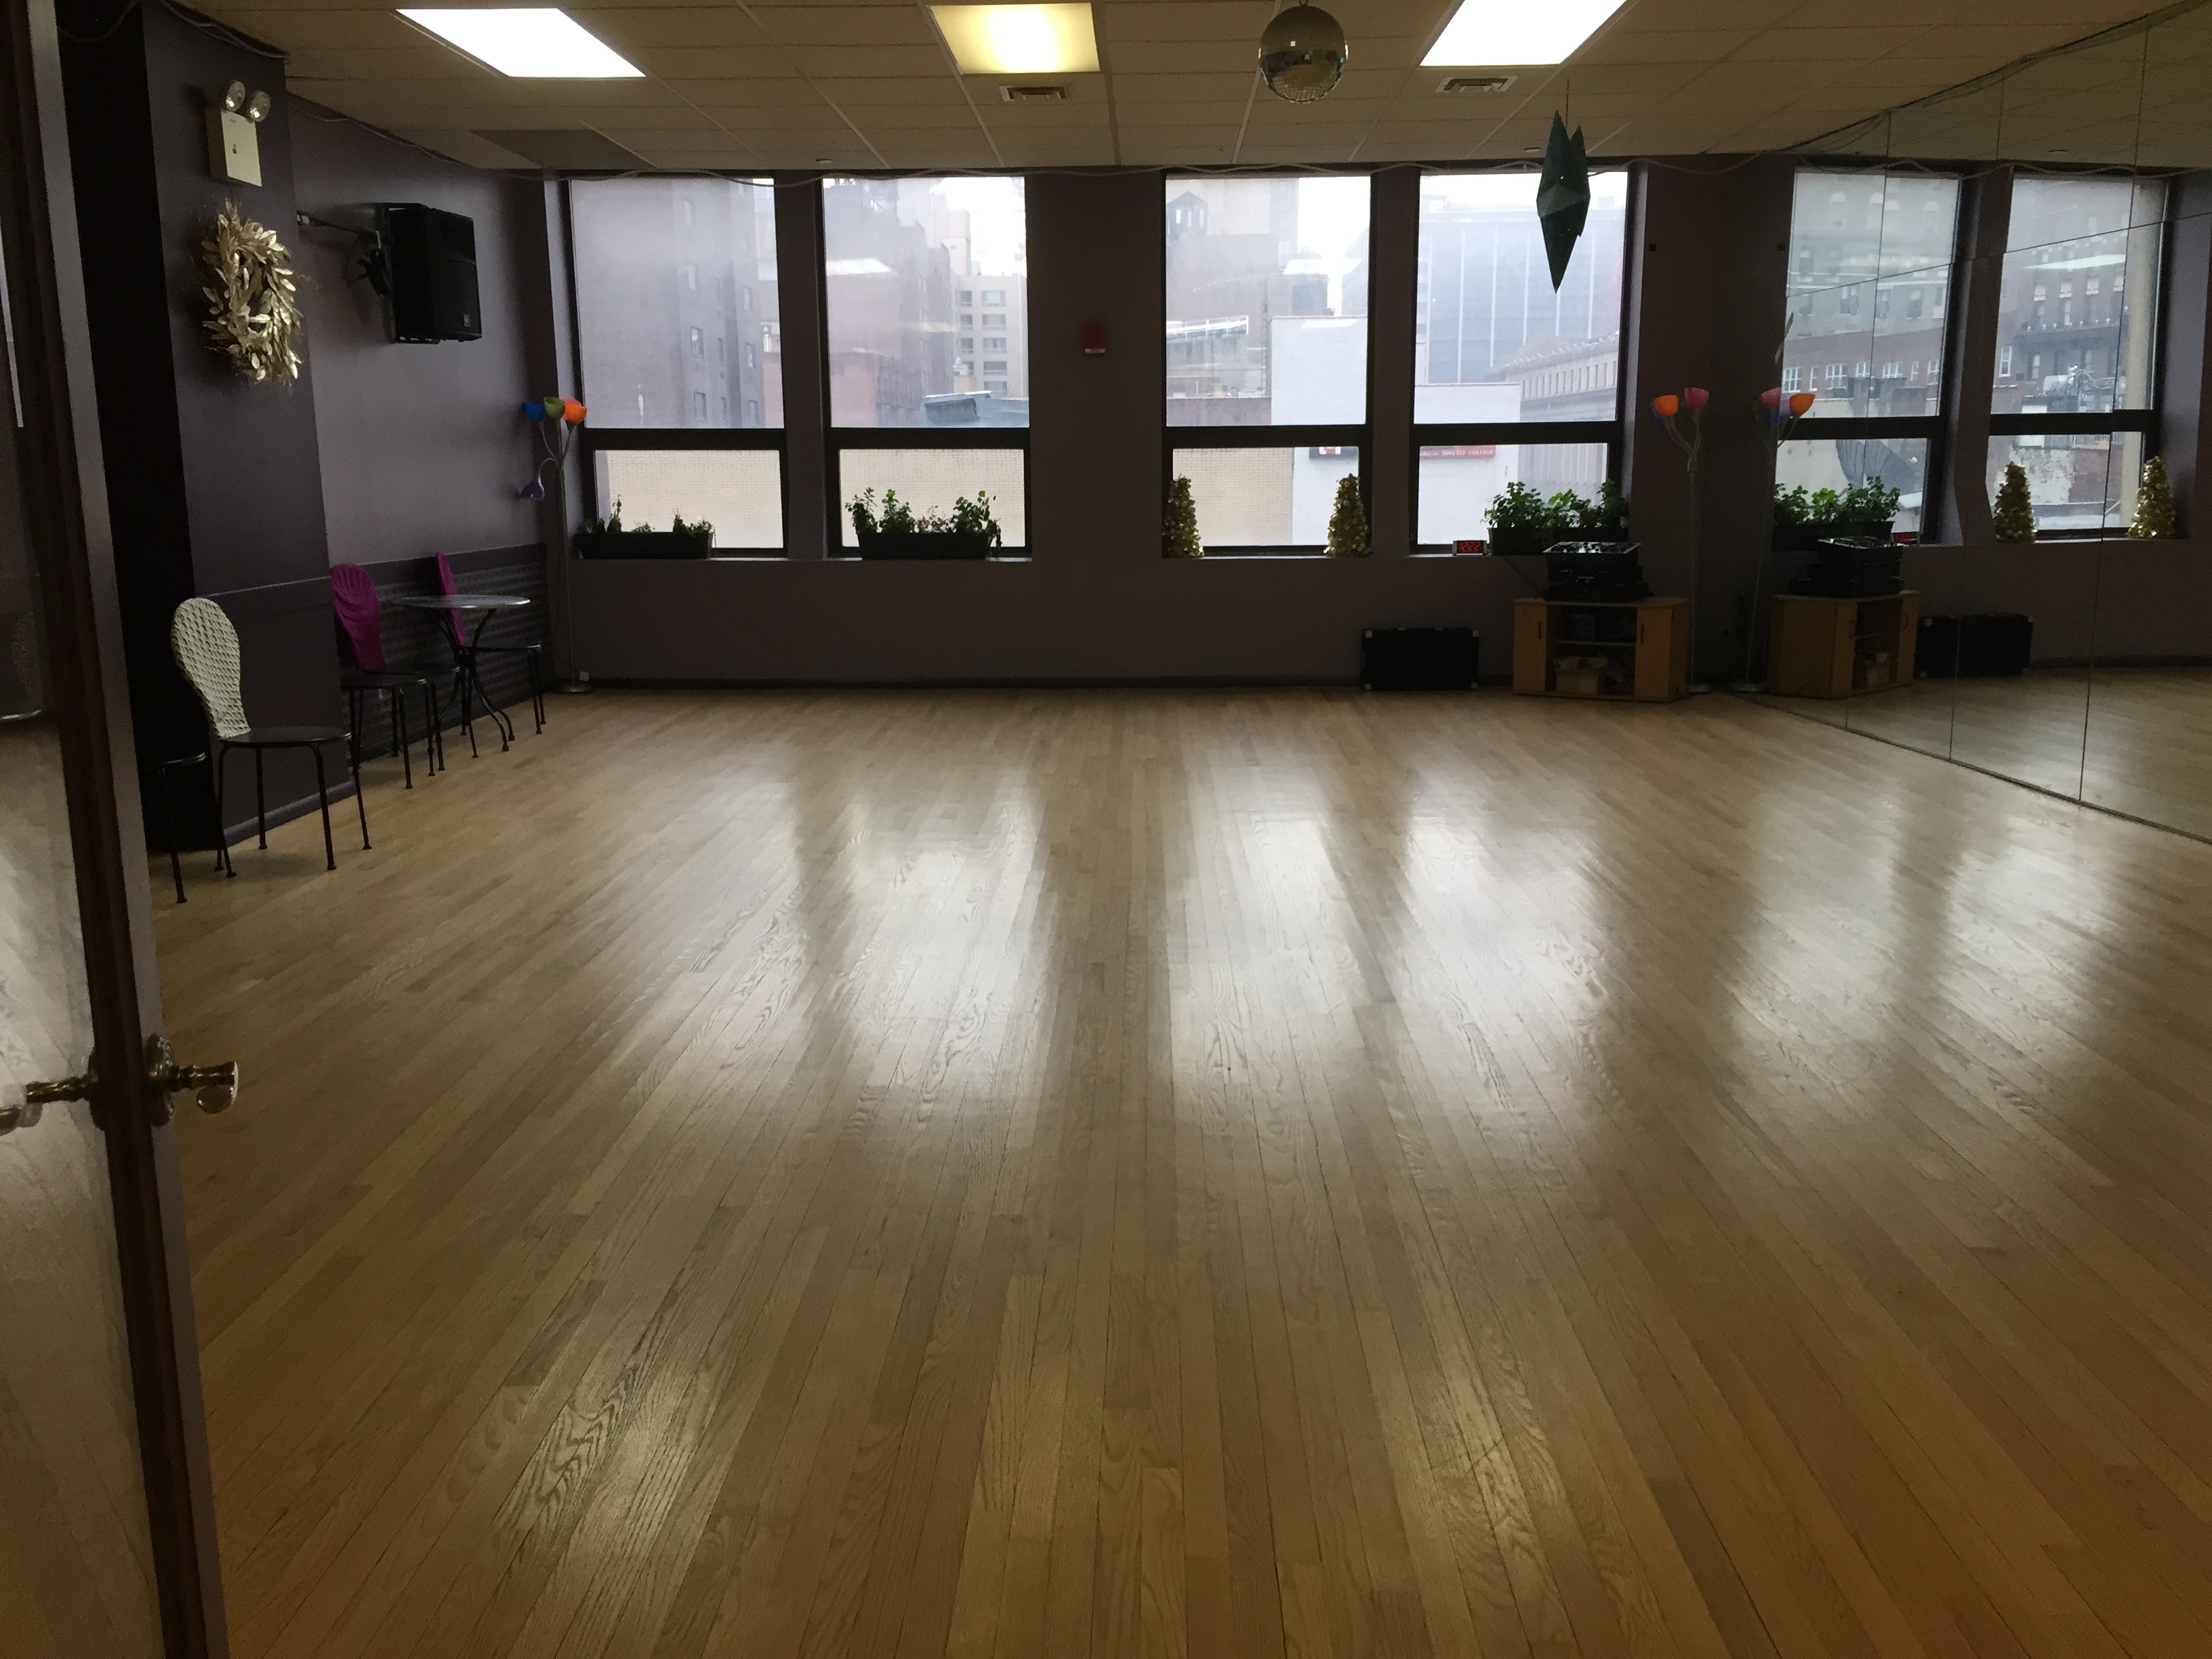 Space Rental Nyc For Rehearsal Space Auditions And Photo